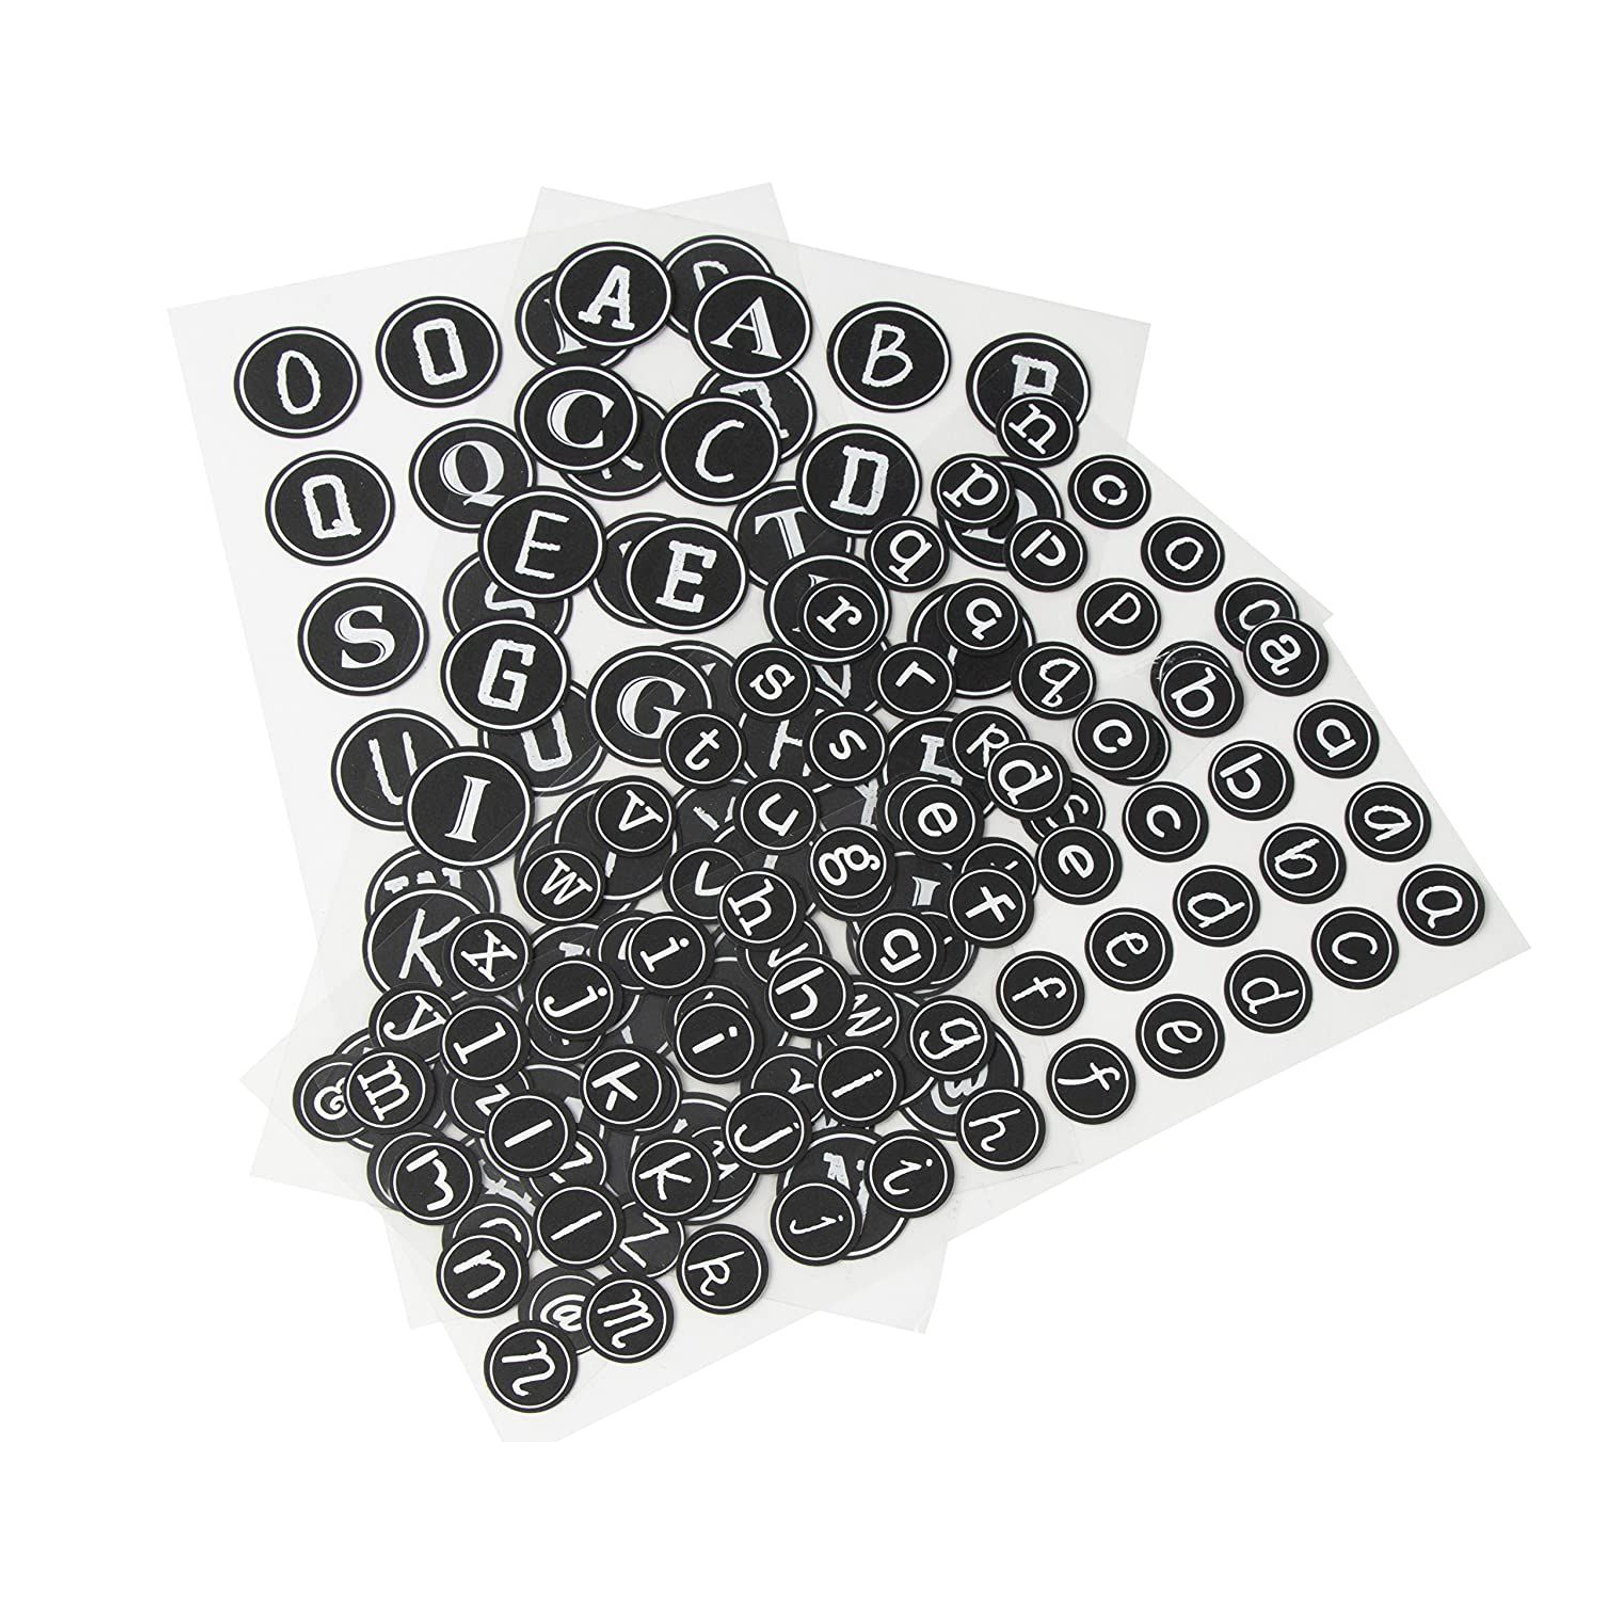 Chalkboard Theme Letter Sticker - 144-Pack Round Alphabet Labels, Includes Uppercase and Lowercase English Letters and Symbols, for Craft Projects, SC